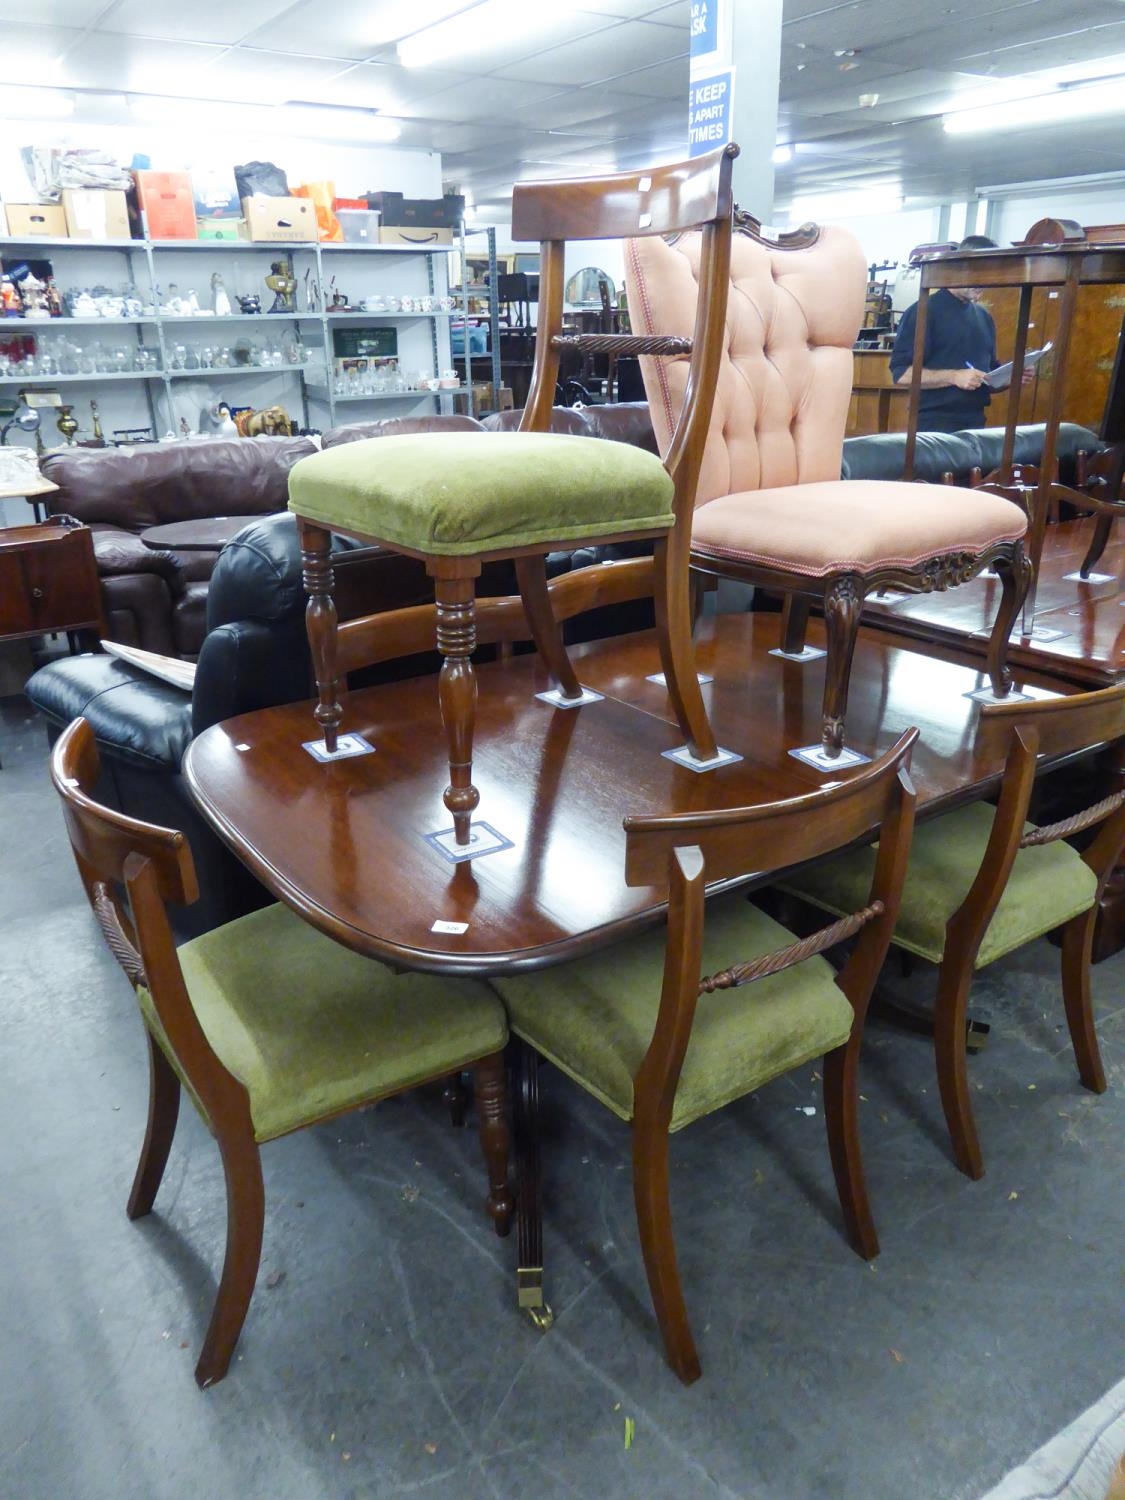 A MODERN REPRODUCTION REGENCY REVIVAL DINING TABLE WITH EXTRA LEAF AND SIX DINING CHAIRS, BY BRIGHTS